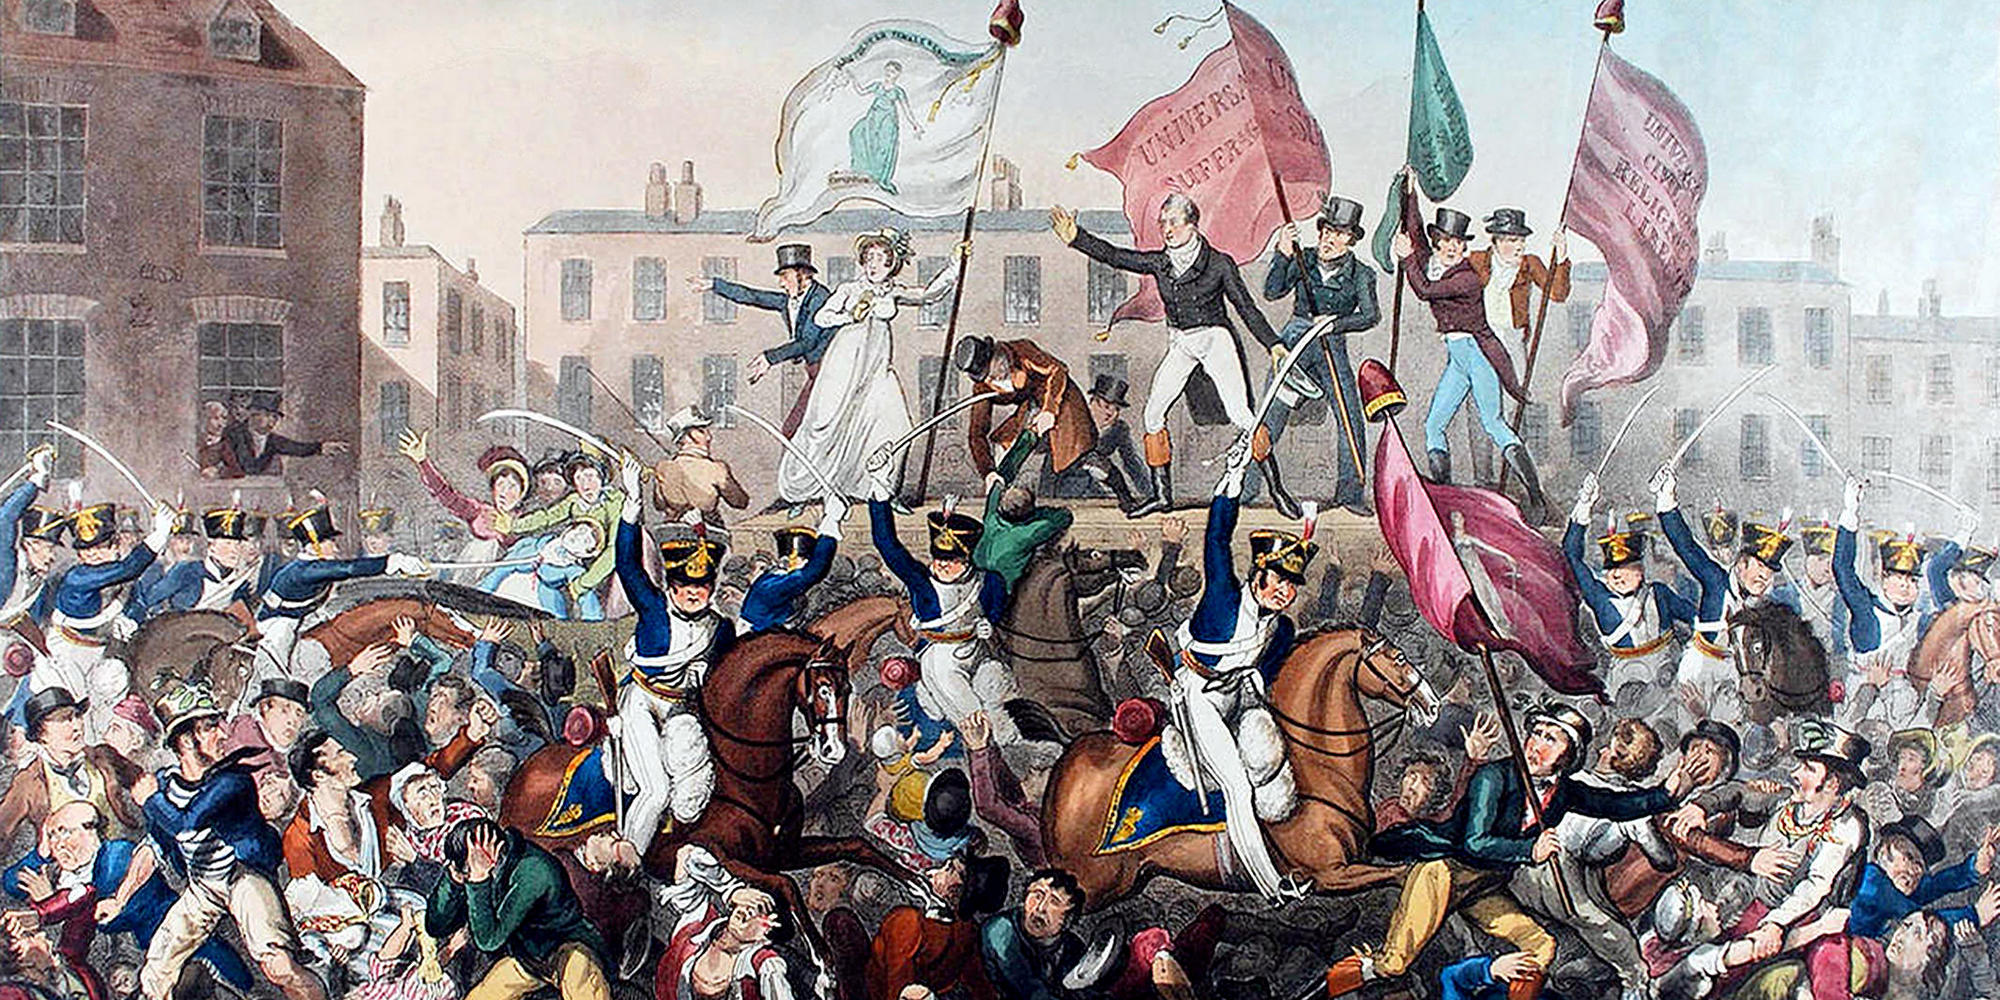 The Peterloo Massacre at St Peter's Field, Manchester, Lancashire, England, 16 August 1819 when cavalry charged into a crowd of 60,000?80,000 who had gathered to demand the reform of parliamentary representation. Image shot 1819. Exact date unknown.